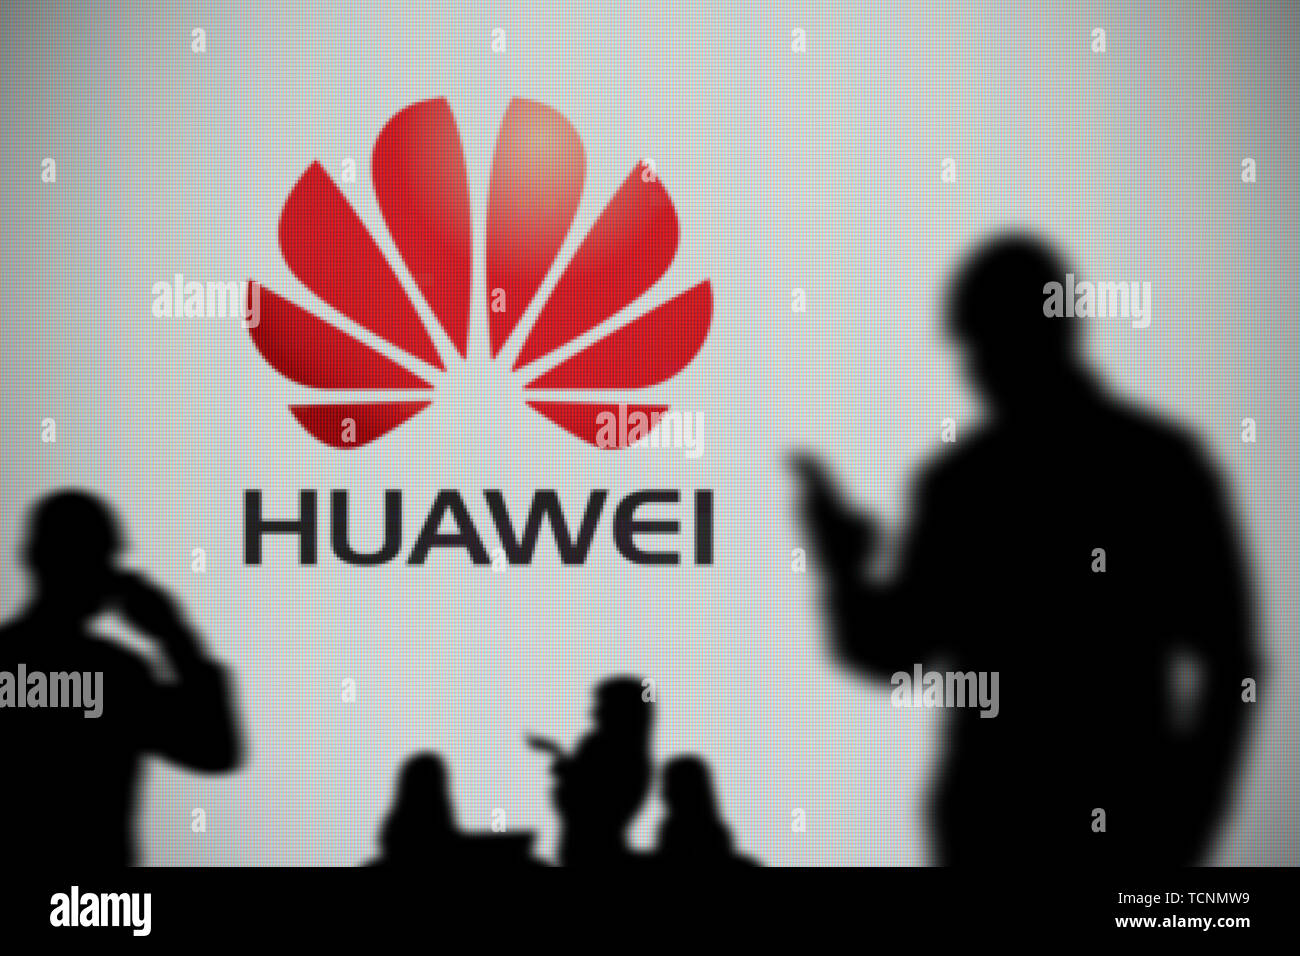 The Huawei logo is seen on an LED screen in the background while a silhouetted person uses a smartphone in the foreground (Editorial use only) Stock Photo